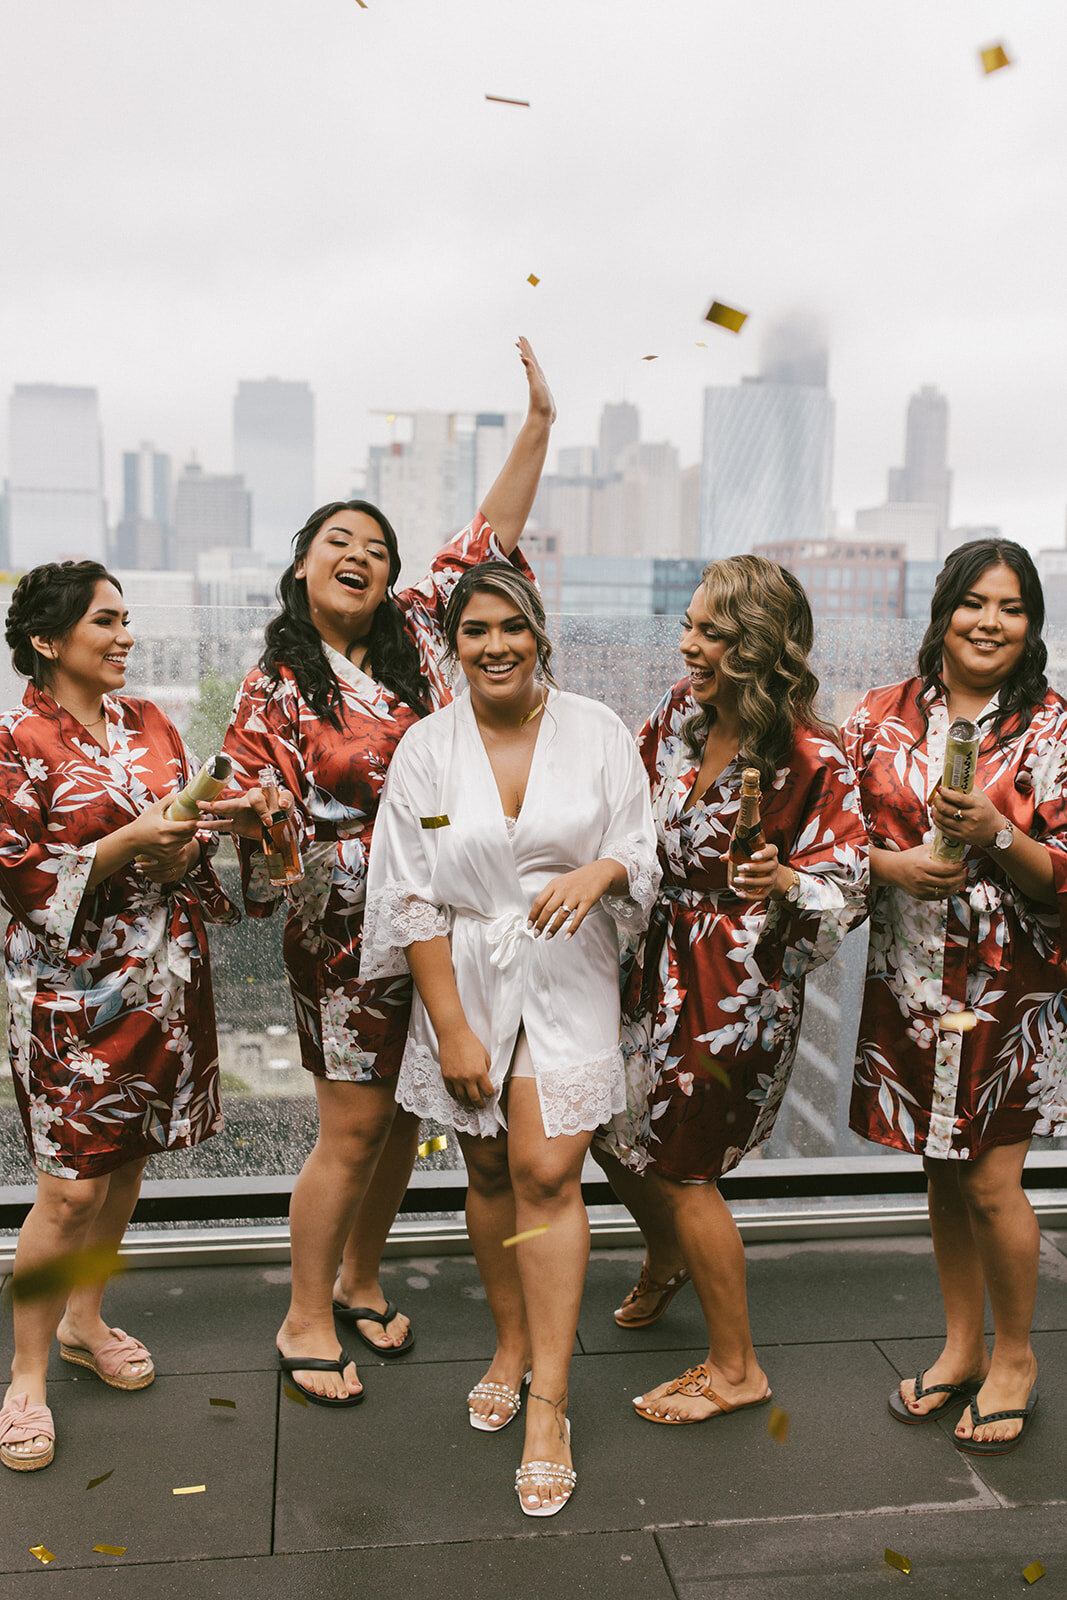 Bride in white satin, lacy robe smiles at camera while four bridesmaids behind her in red and white floral robes shoot confetti overlooking Chicago skyline.